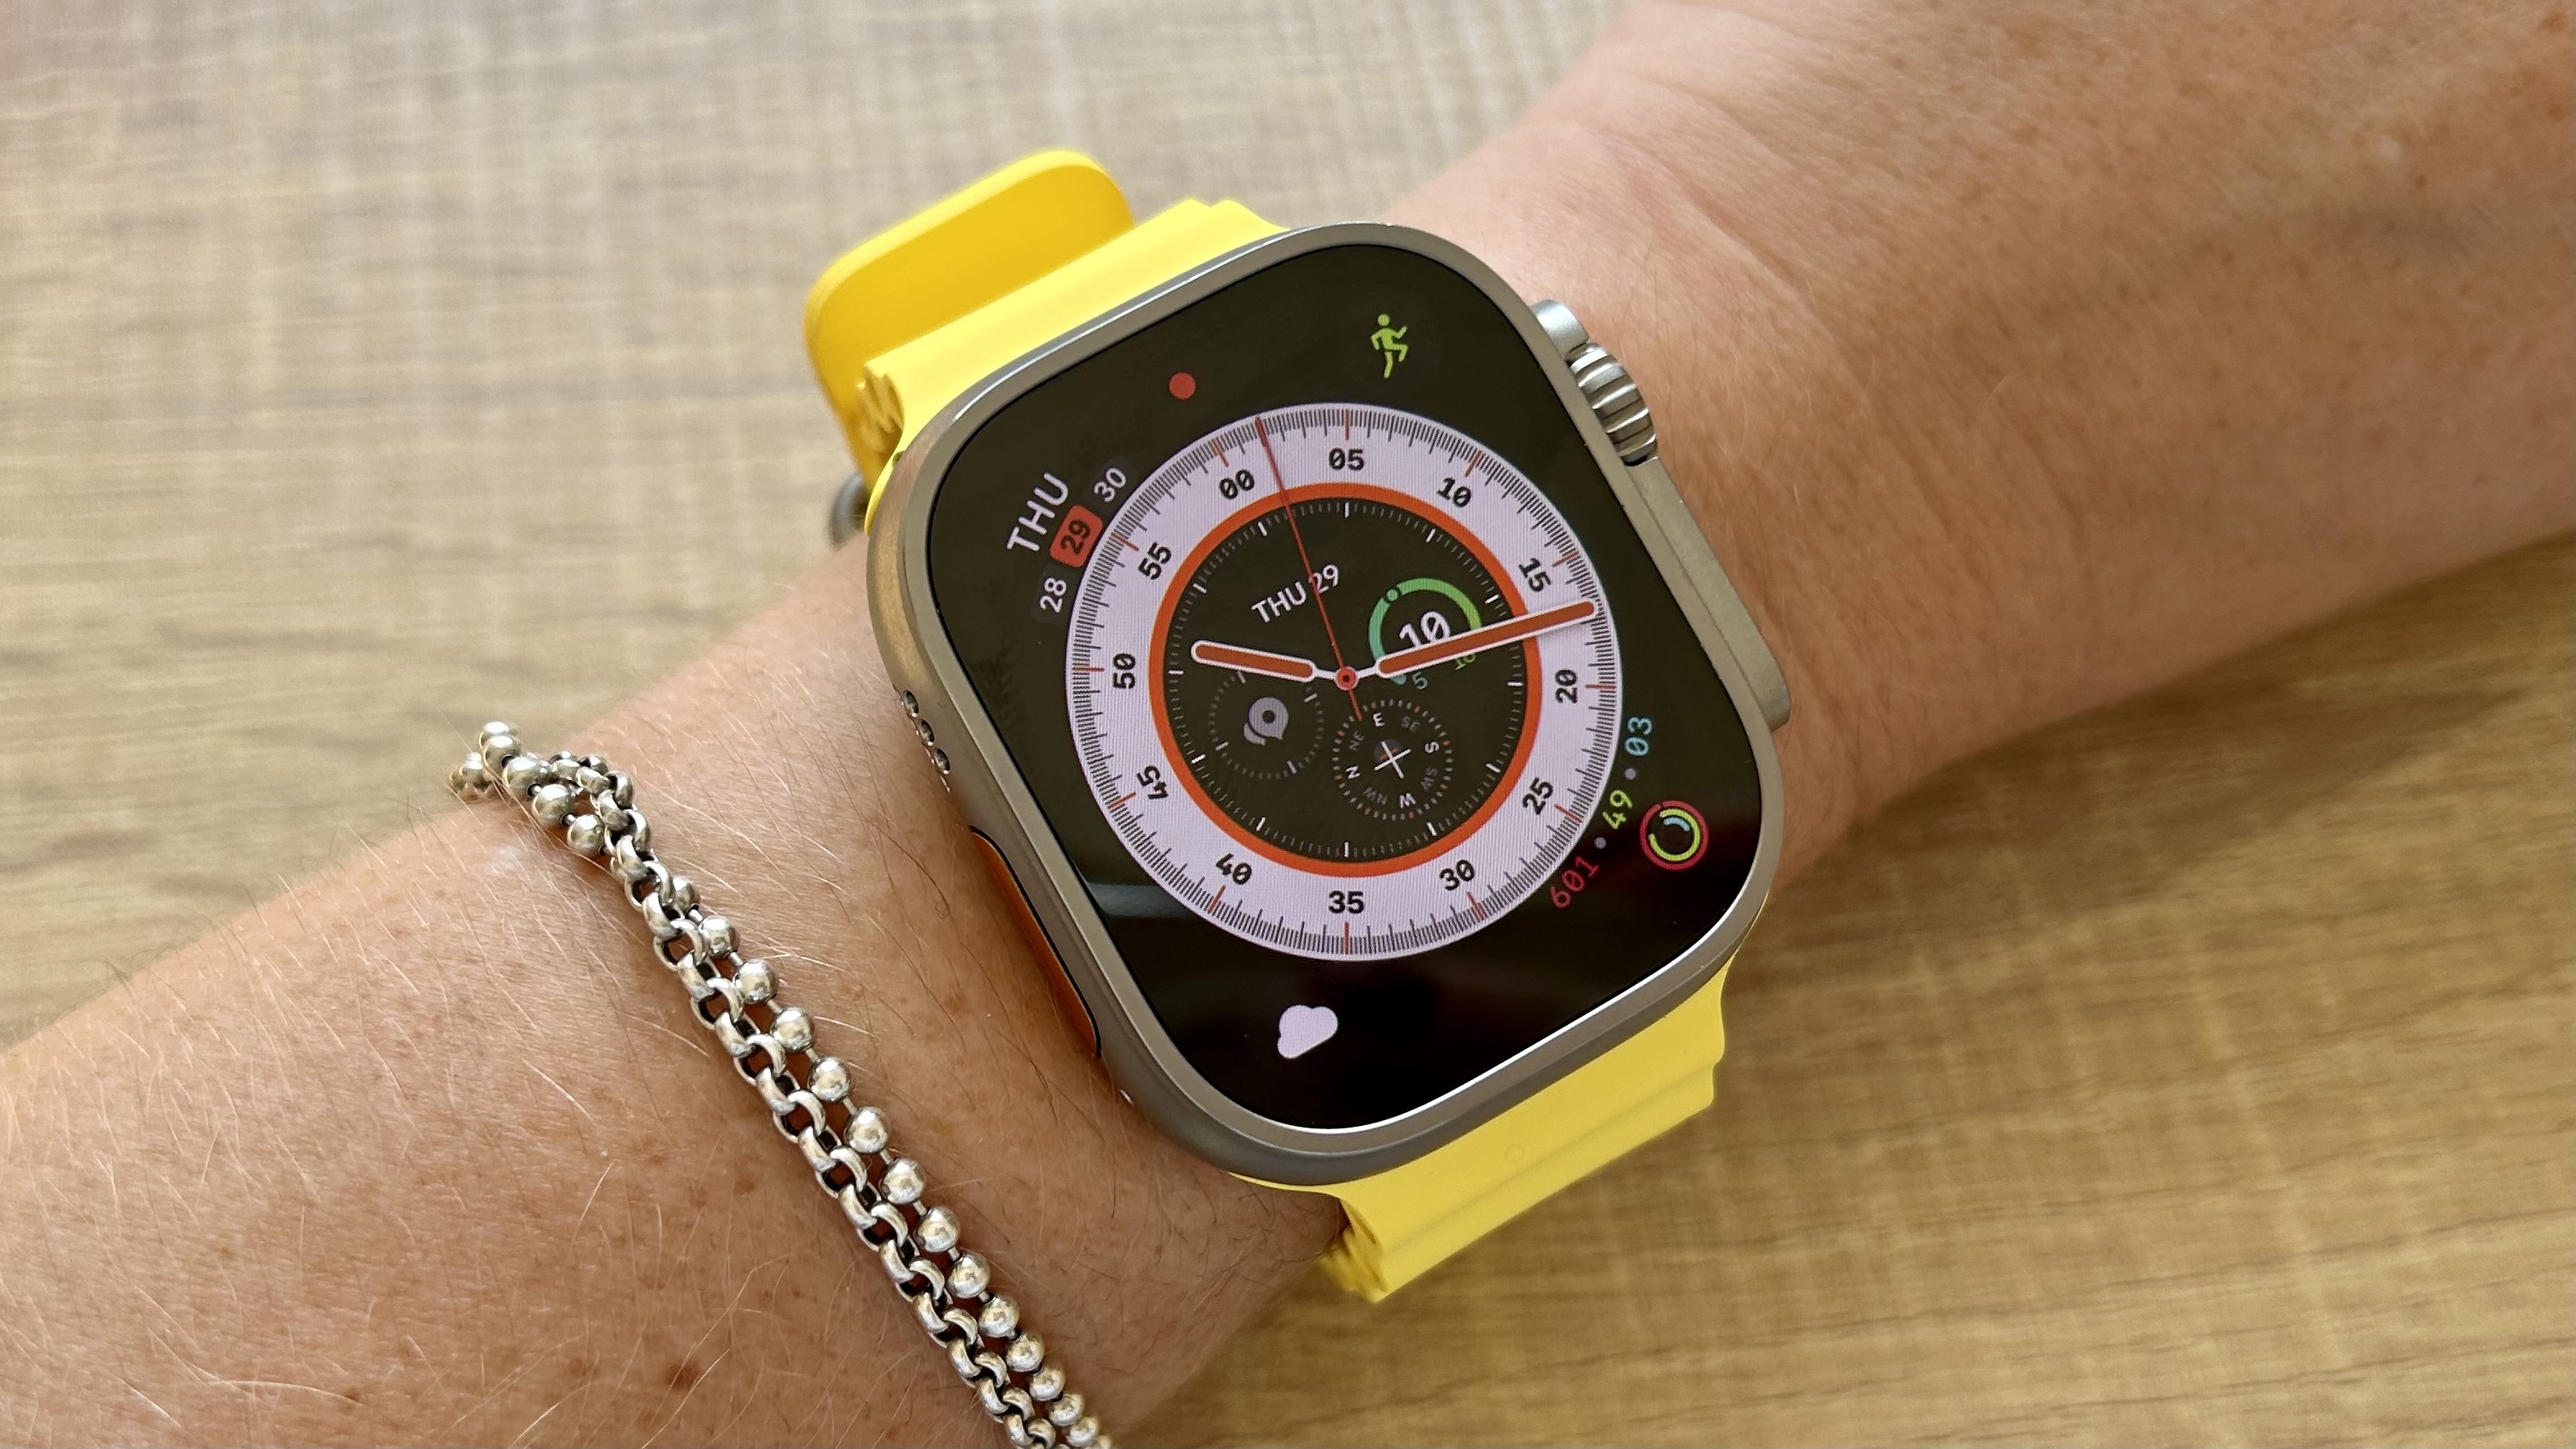 A photo of the Apple Watch Ultra with the Ocean Loop band